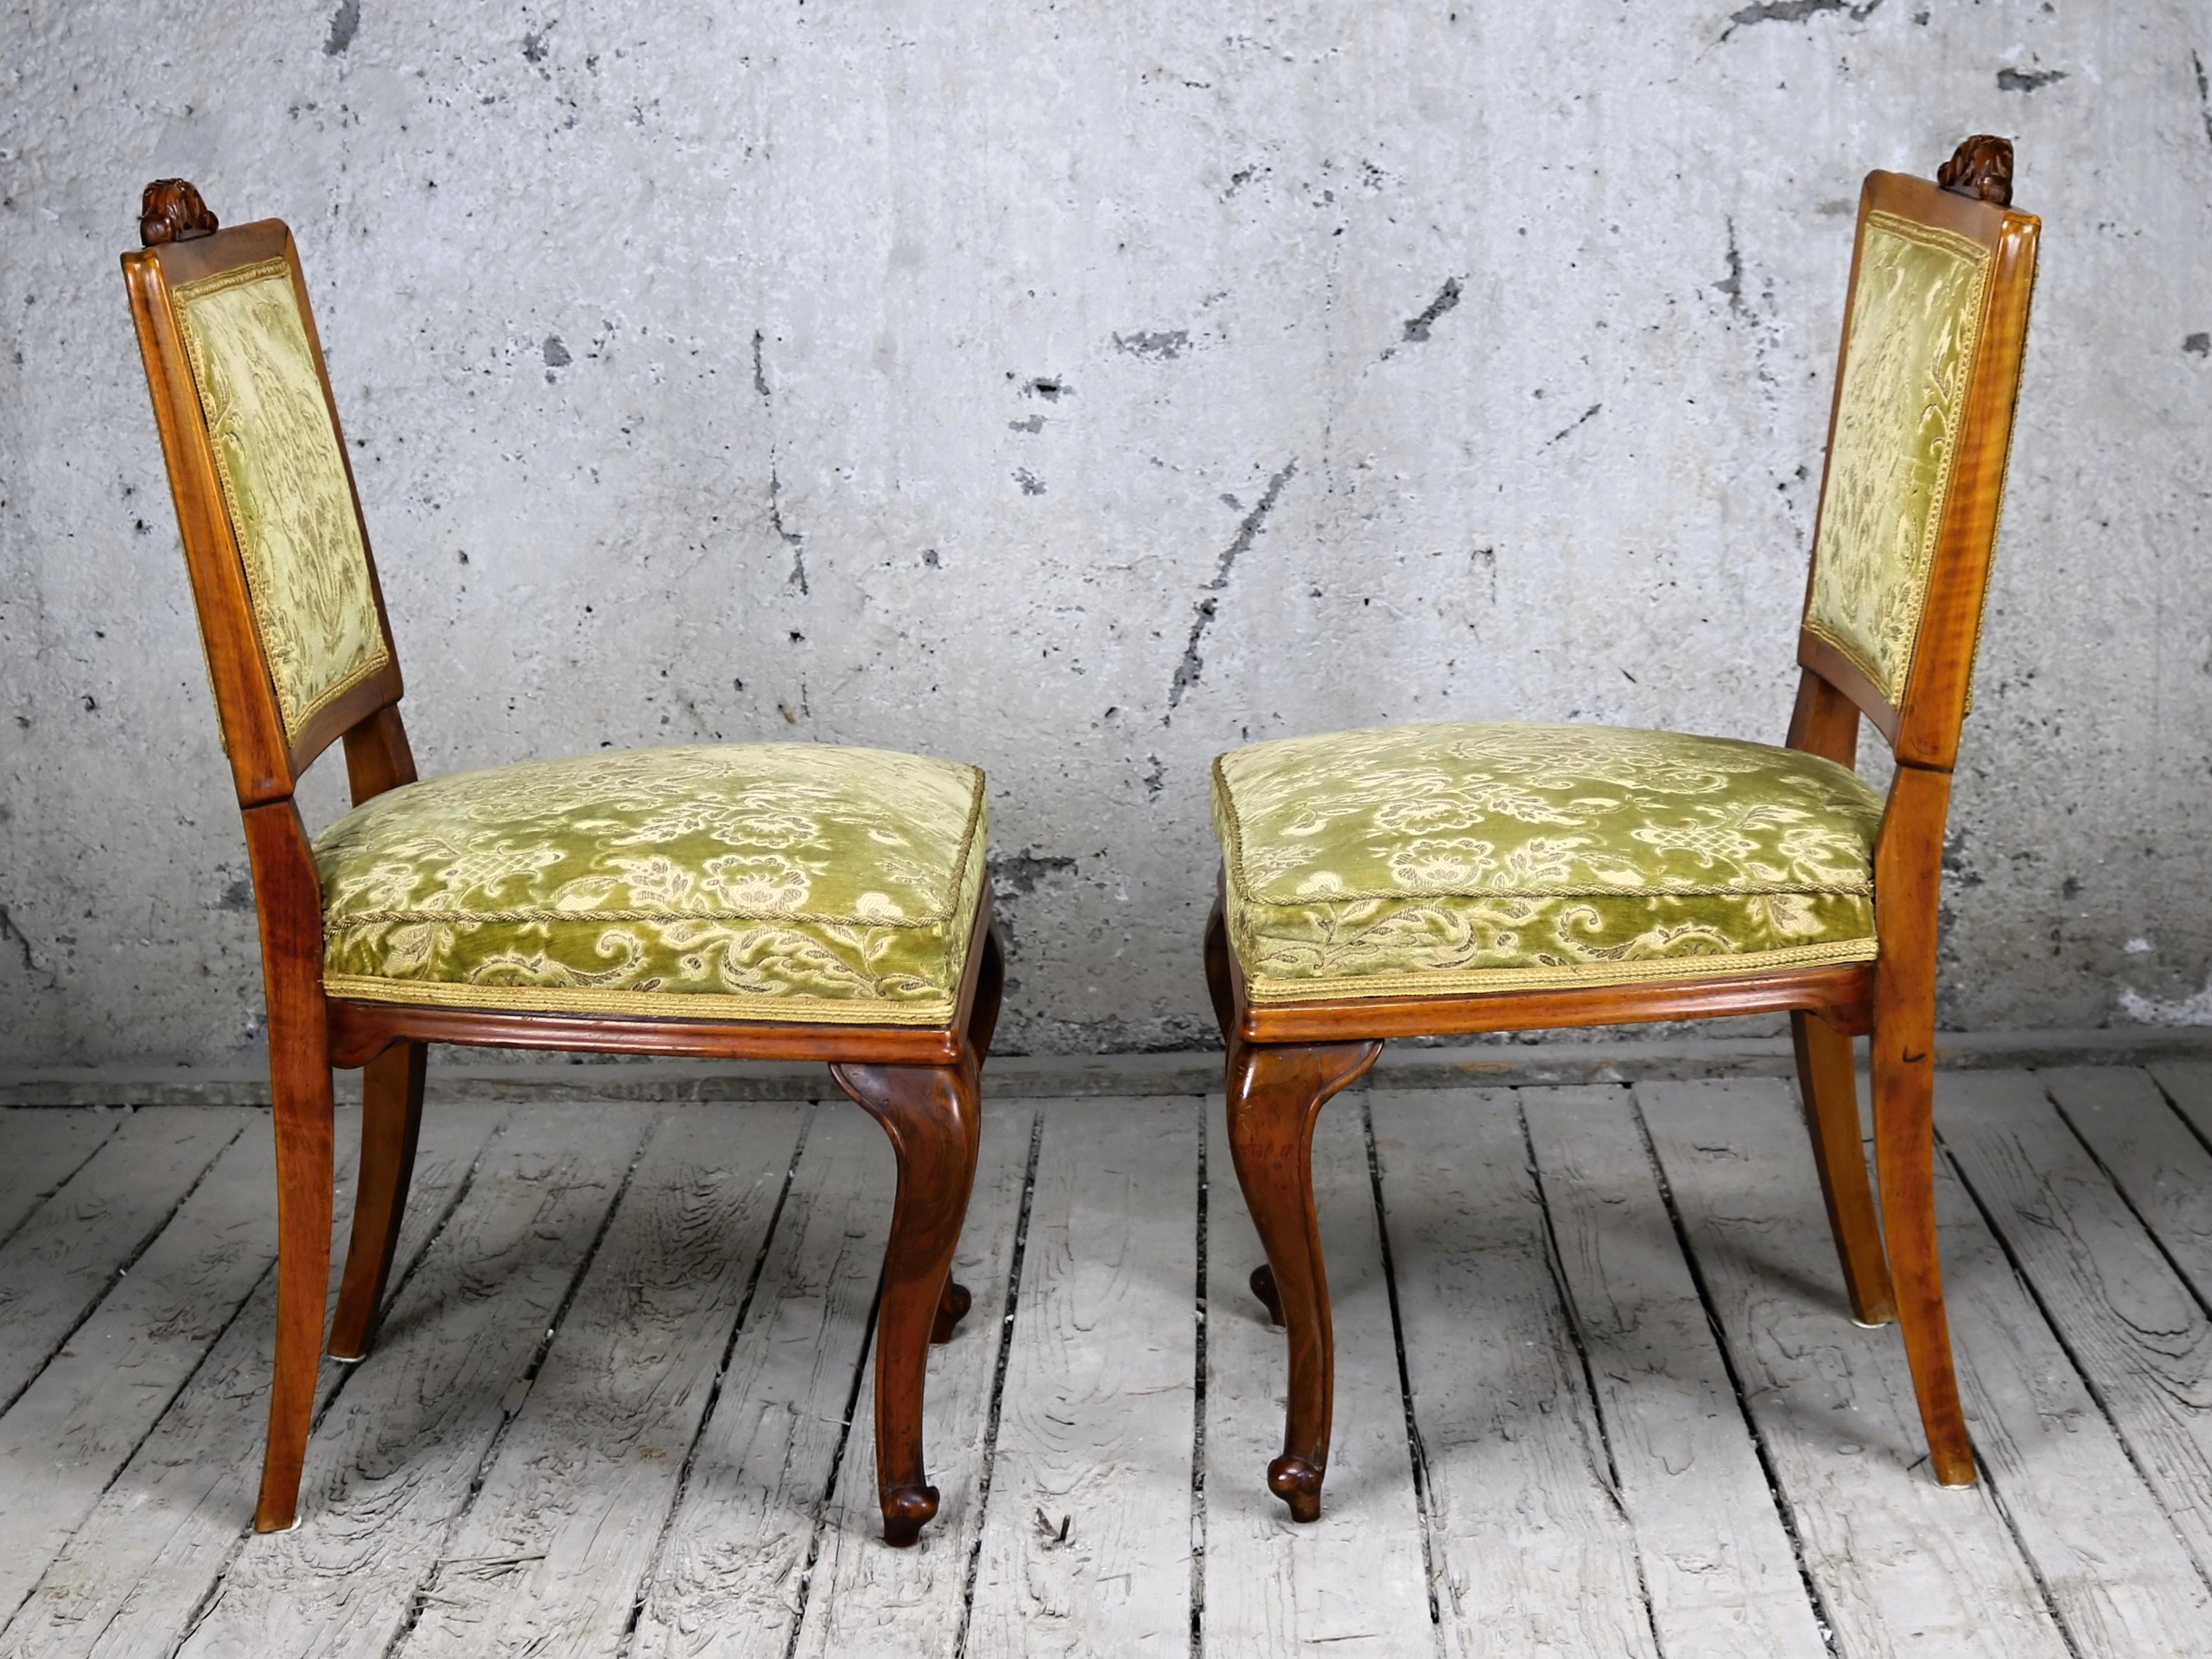 Hungarian Pair of Fruitwood Side Chairs, circa 1900